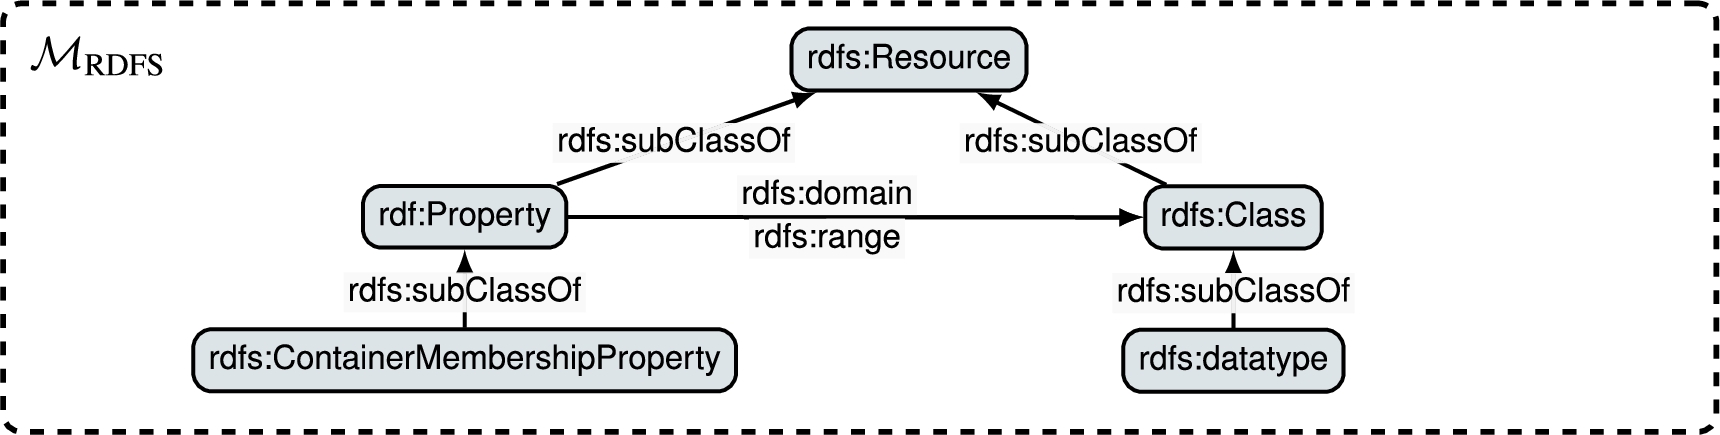 Fragment of the RDFS metamodel (i.e., MRDFS) considered in this paper.